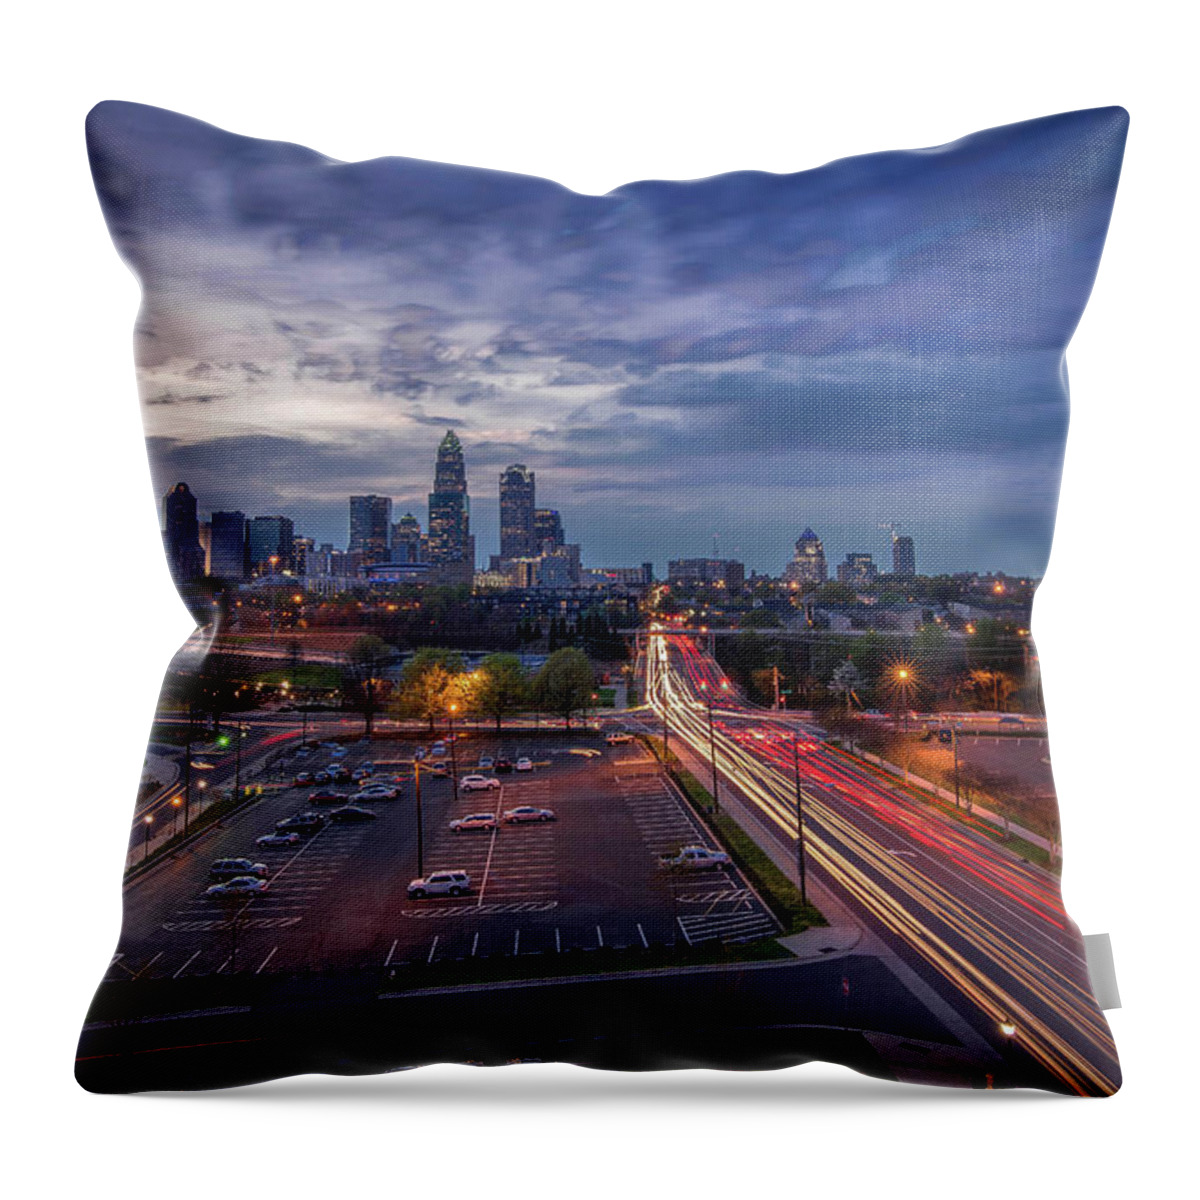 Charlotte Throw Pillow featuring the photograph Uptown Charlotte Rush Hour by Serge Skiba